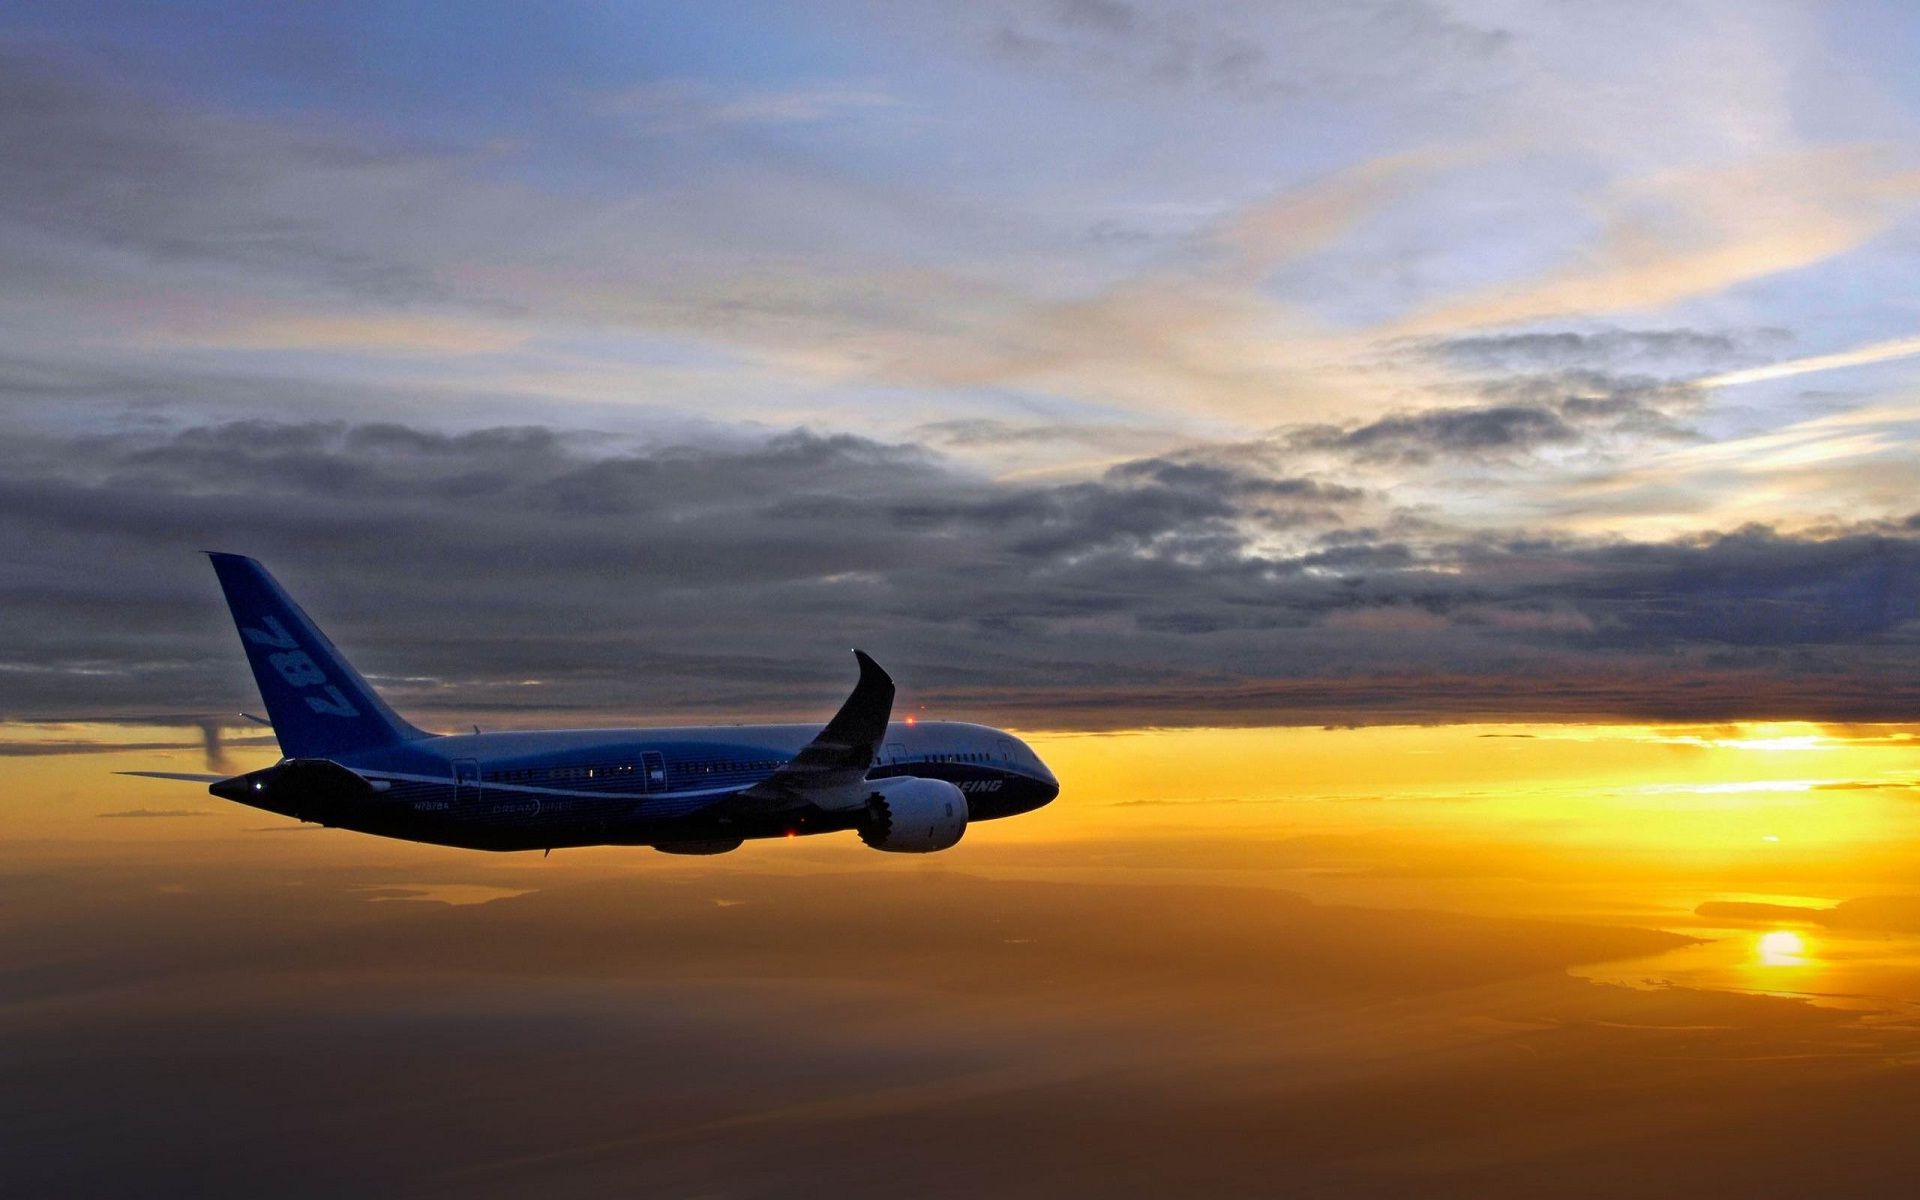 Passenger plane high quality wallpapers | HD Wallpapers Rocks